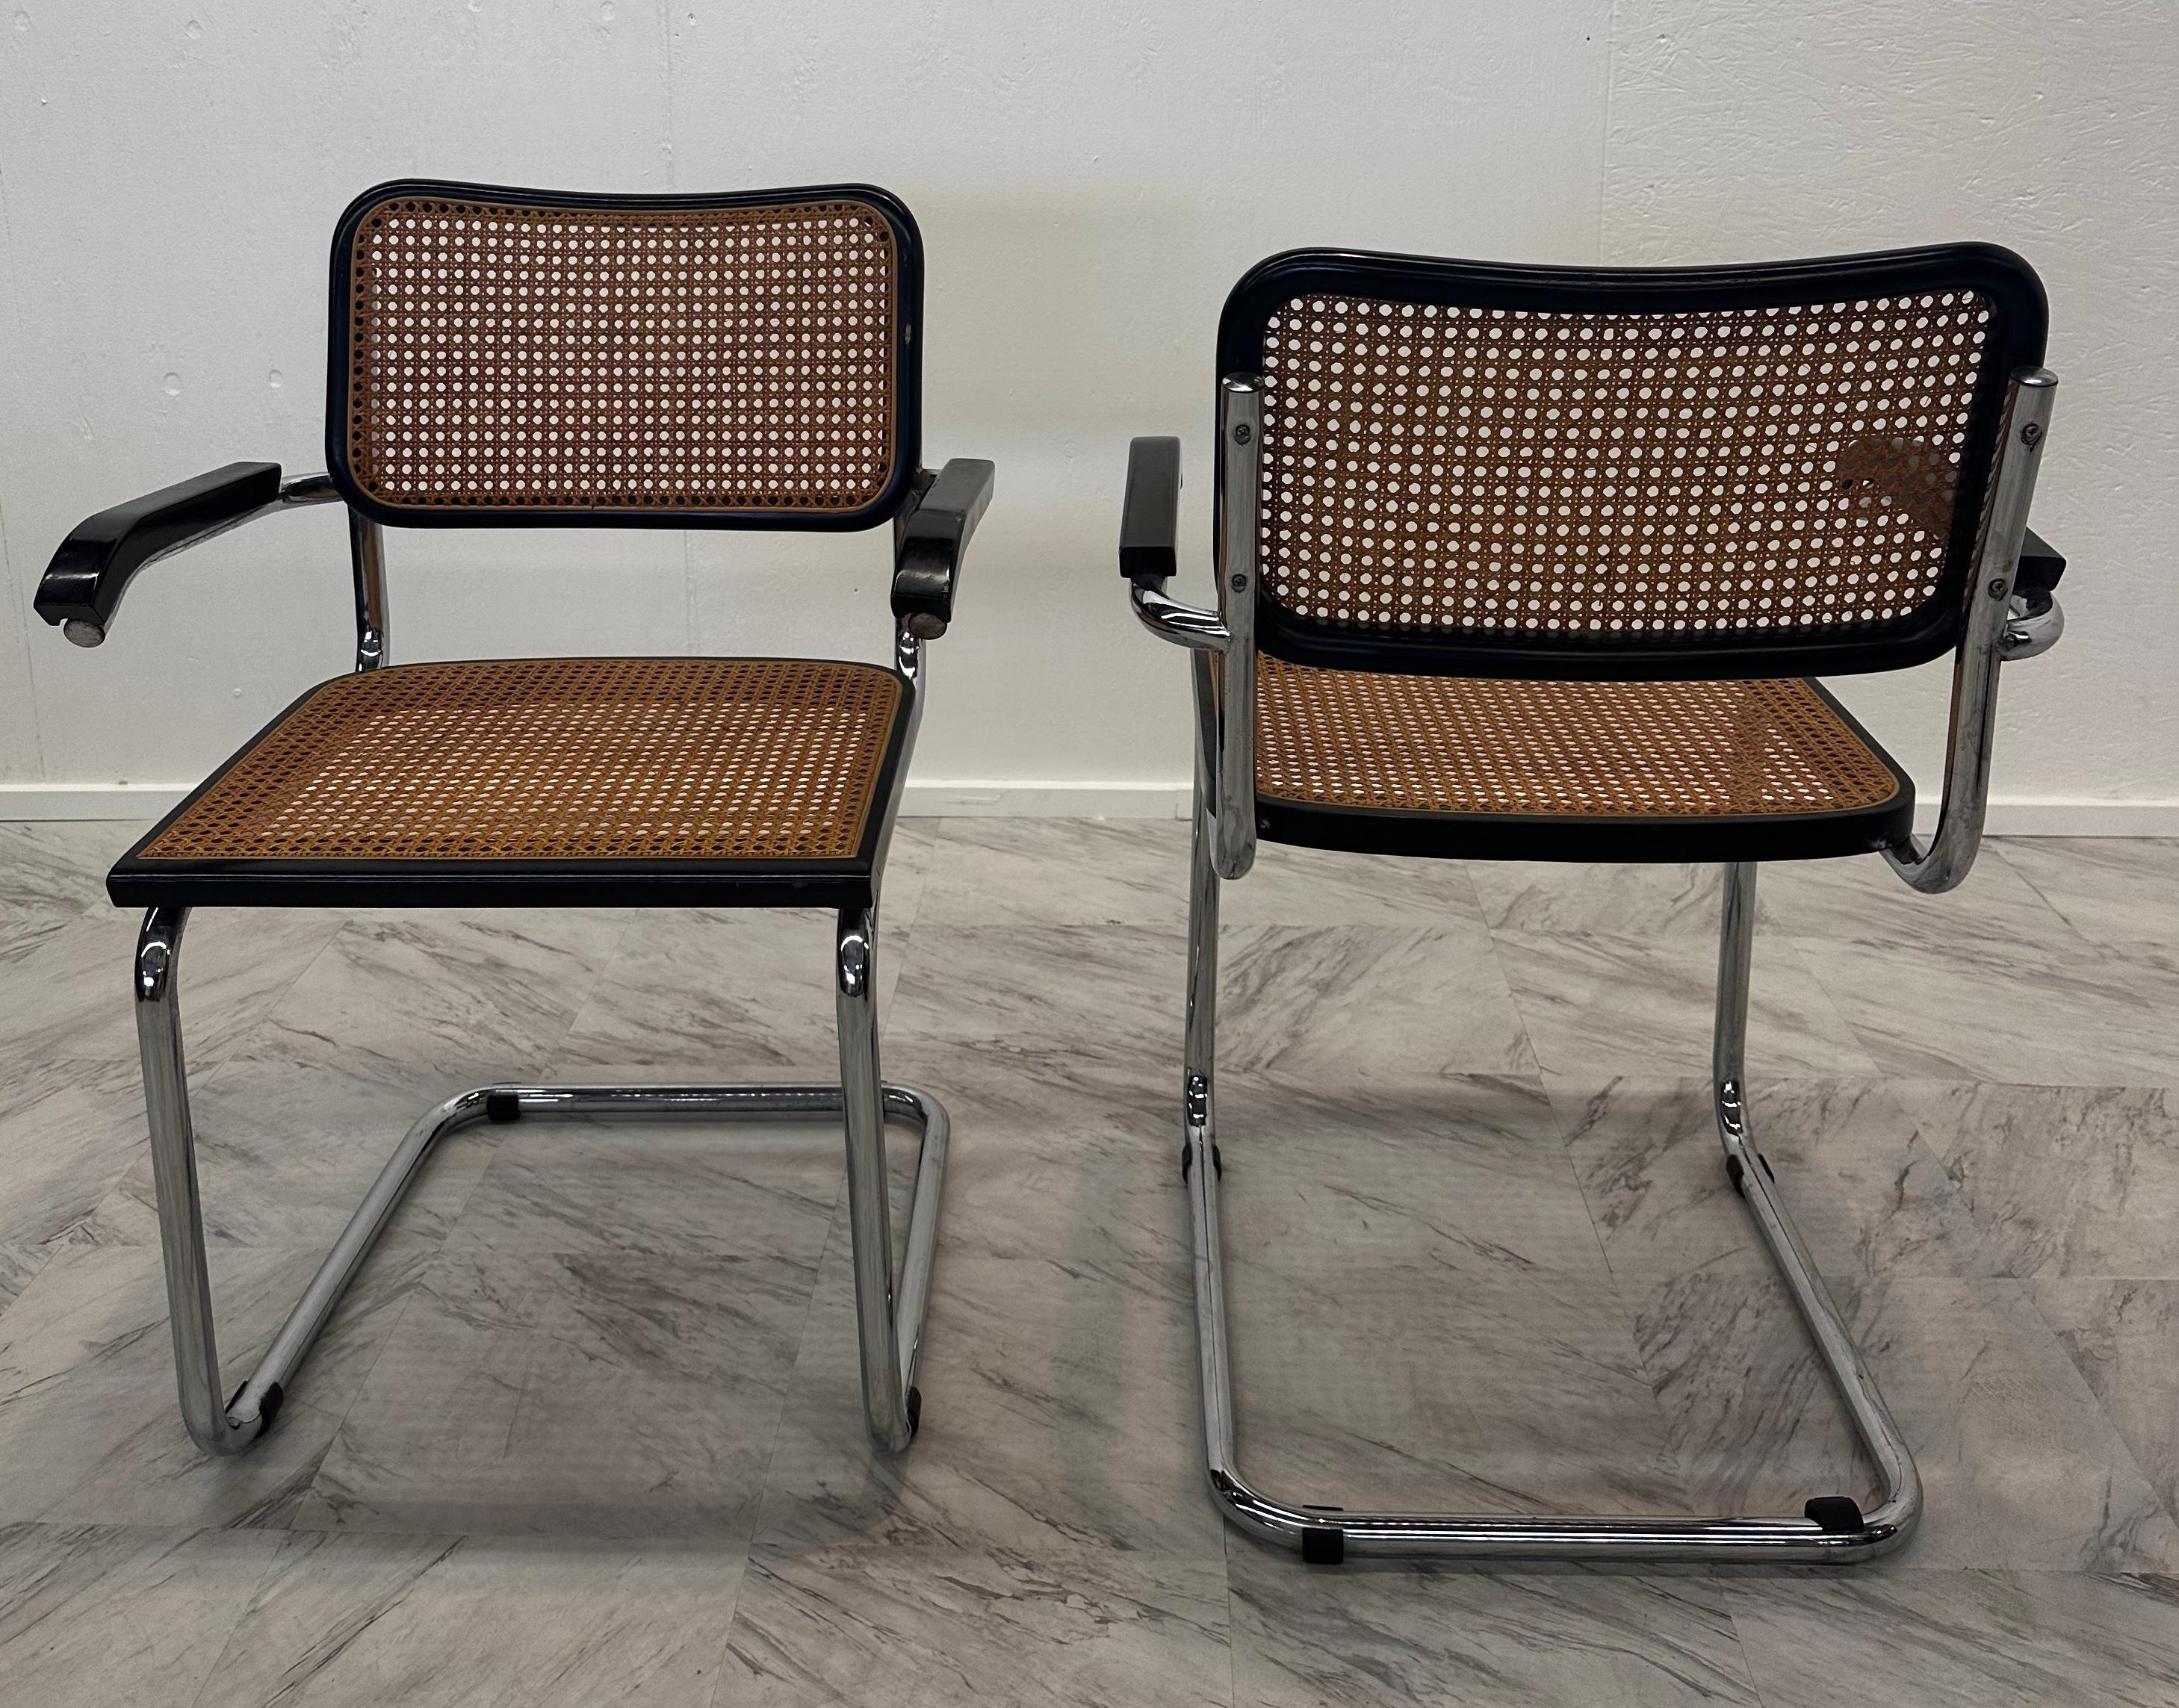 Pair of 4 Chairs, model Cesca, designed by Marcel Breuer. Manufactured in Italy around 1960 by Gavina manufacturer. Metal pipe frame, wood seat and back structure and rattan. In good original condition, with minor wear consistent with age and use,